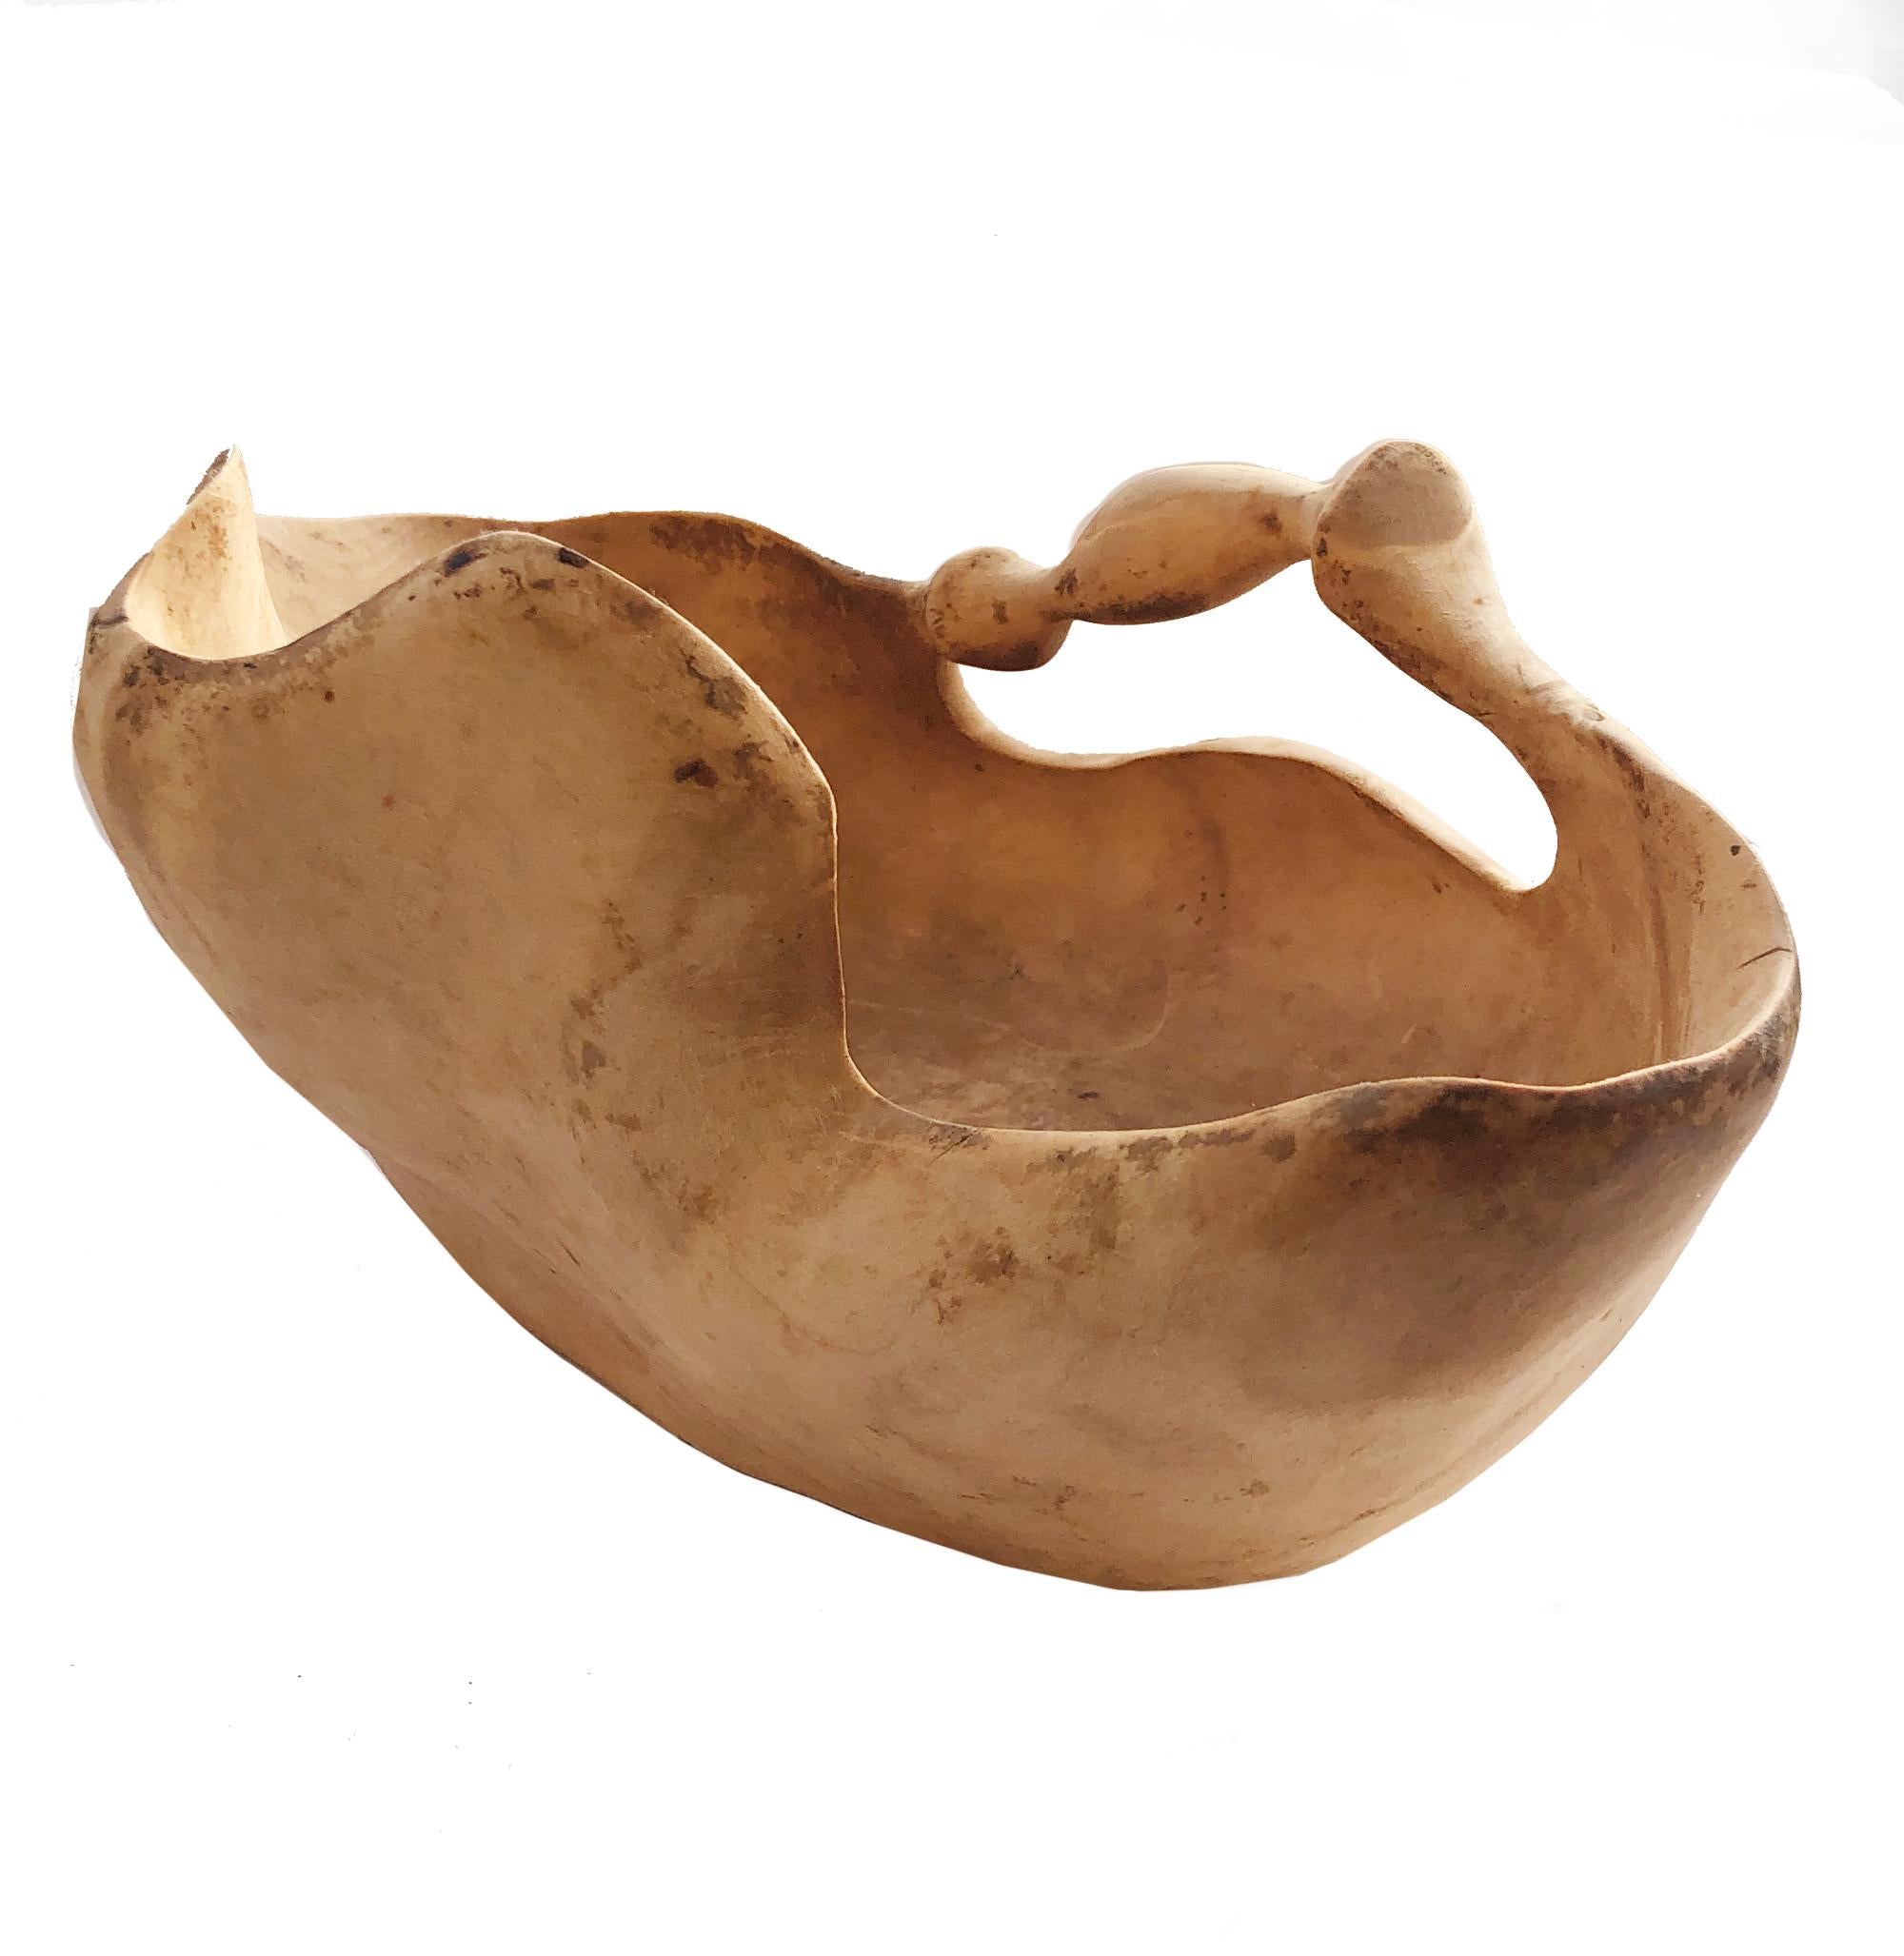 Beautiful and odd: Handcrafted bowl made out of birch wood. The handle is designed for being able to carry vegetables. Made in Vännäs, Sweden by Holger Jonsson, June, 1978. A unique shaped object with original surface.